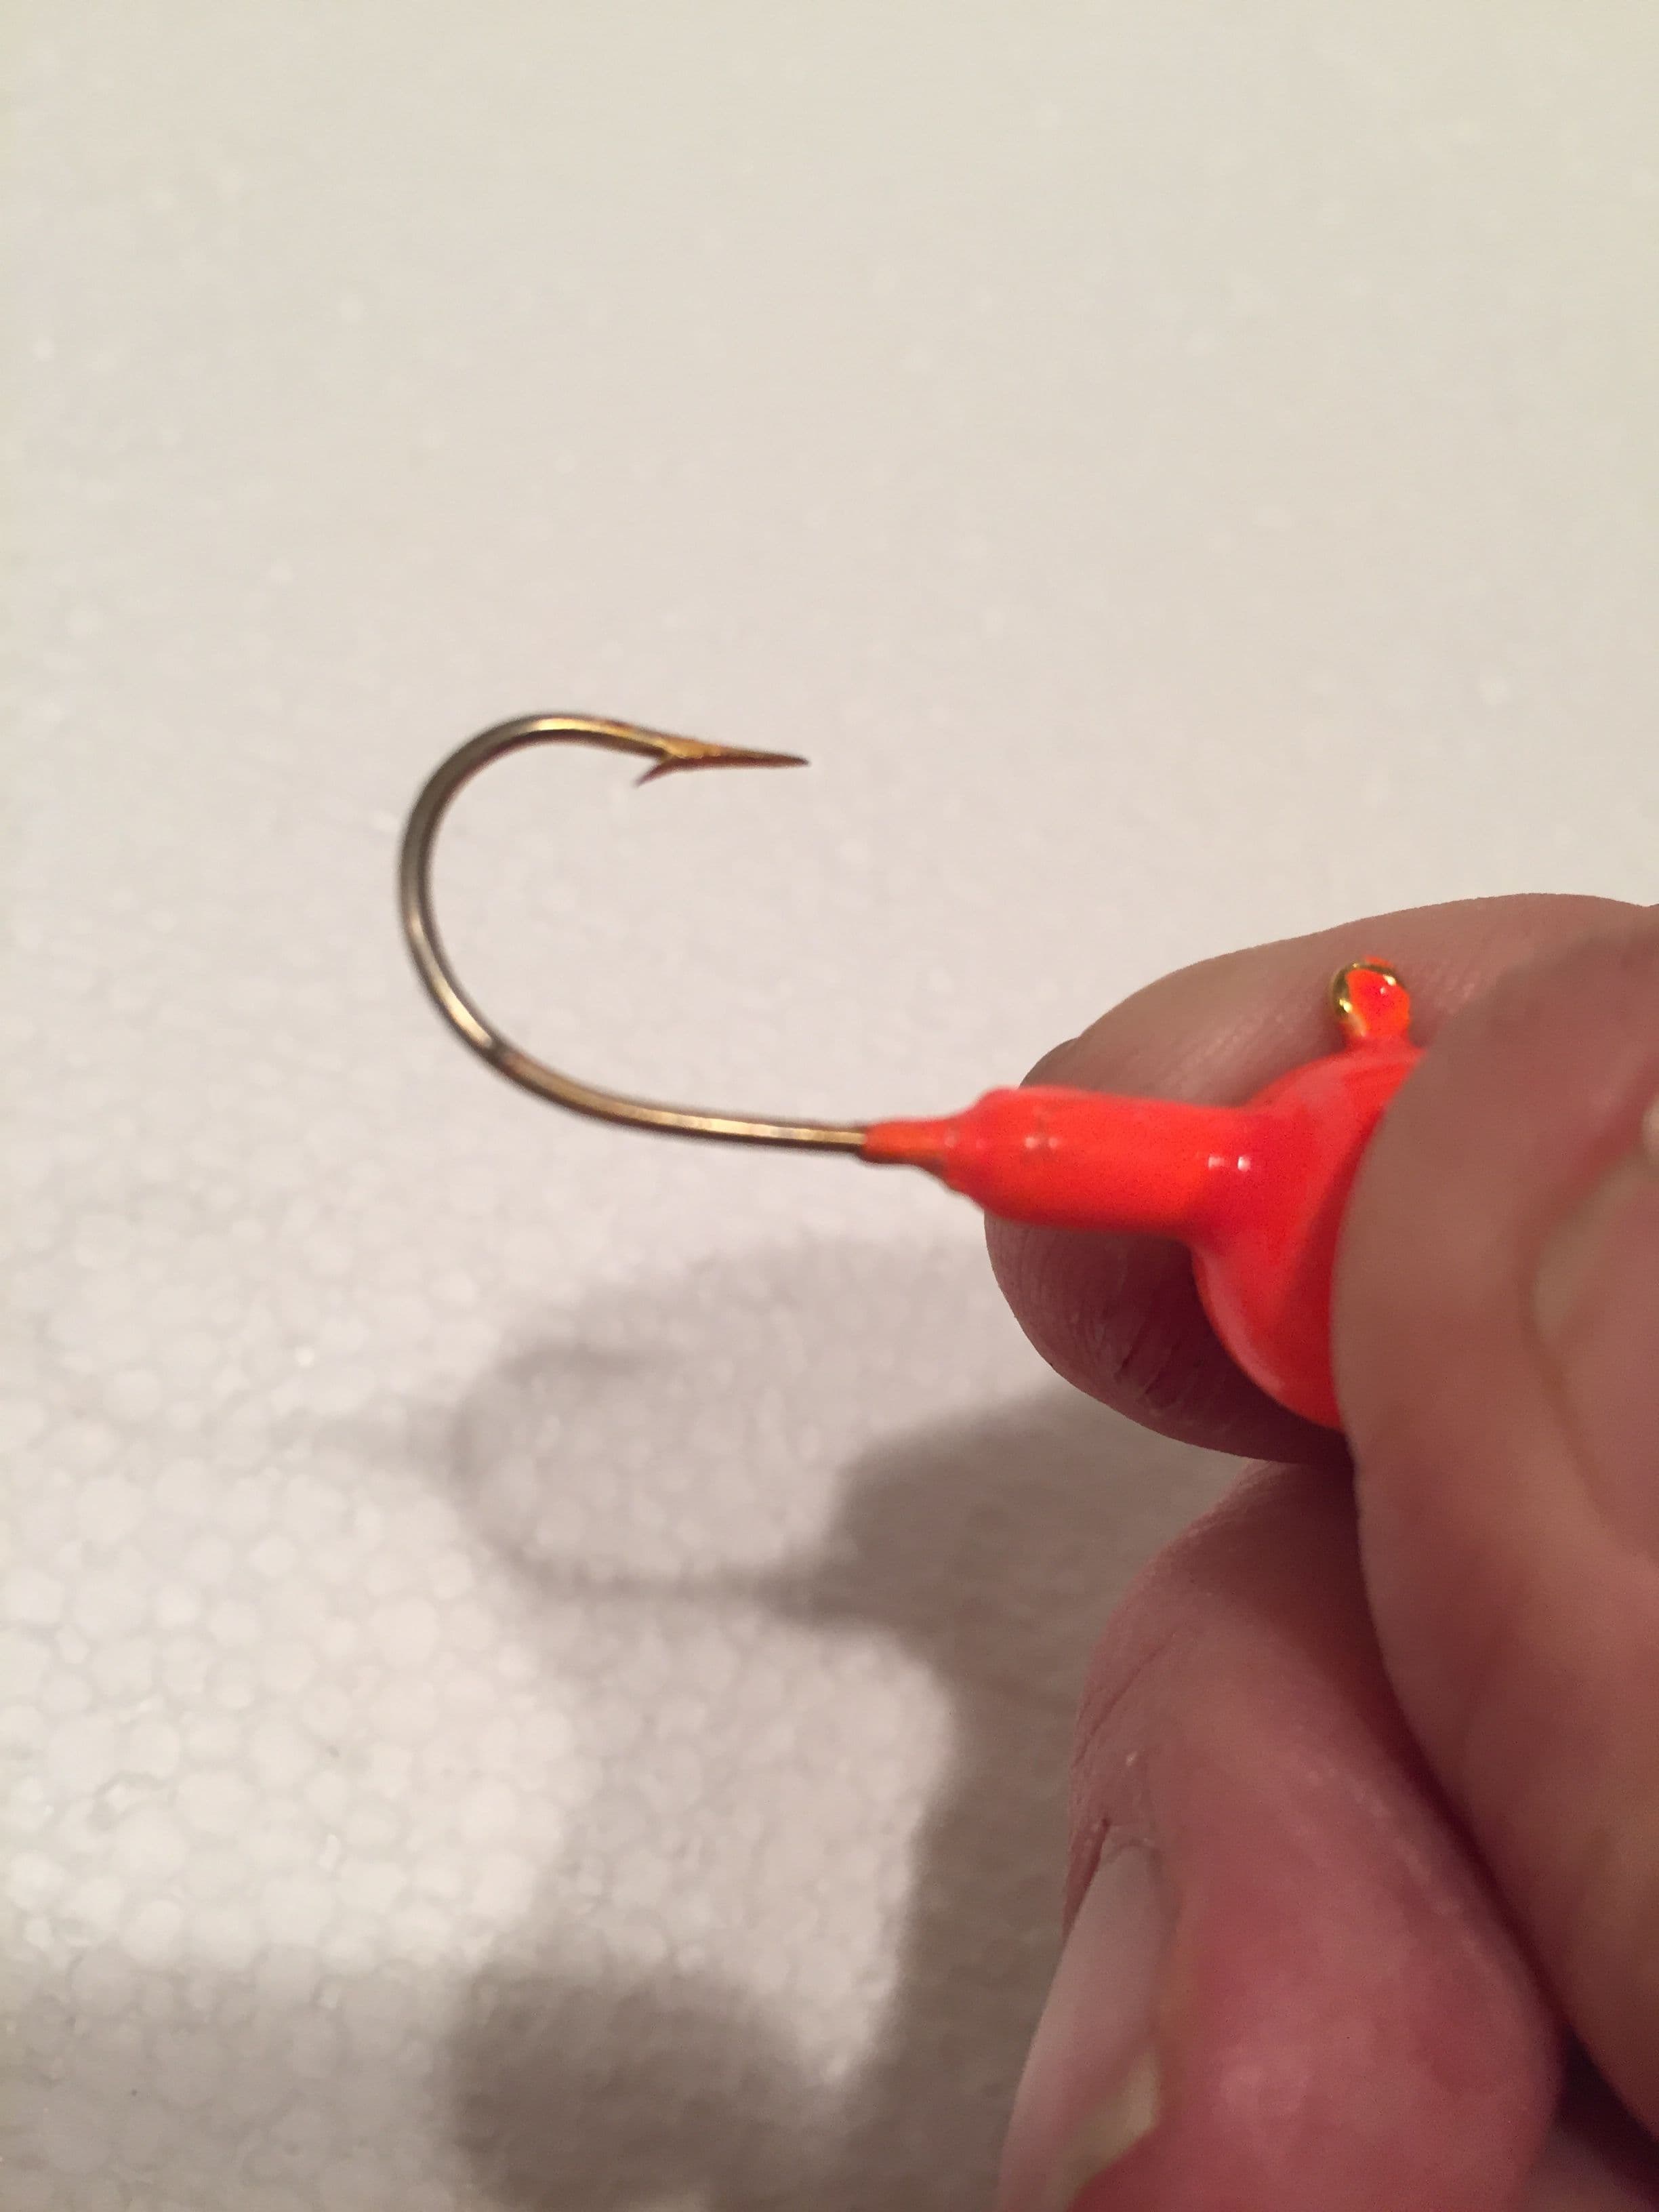 Why are Fisherman Required to Use Barbless Hooks?